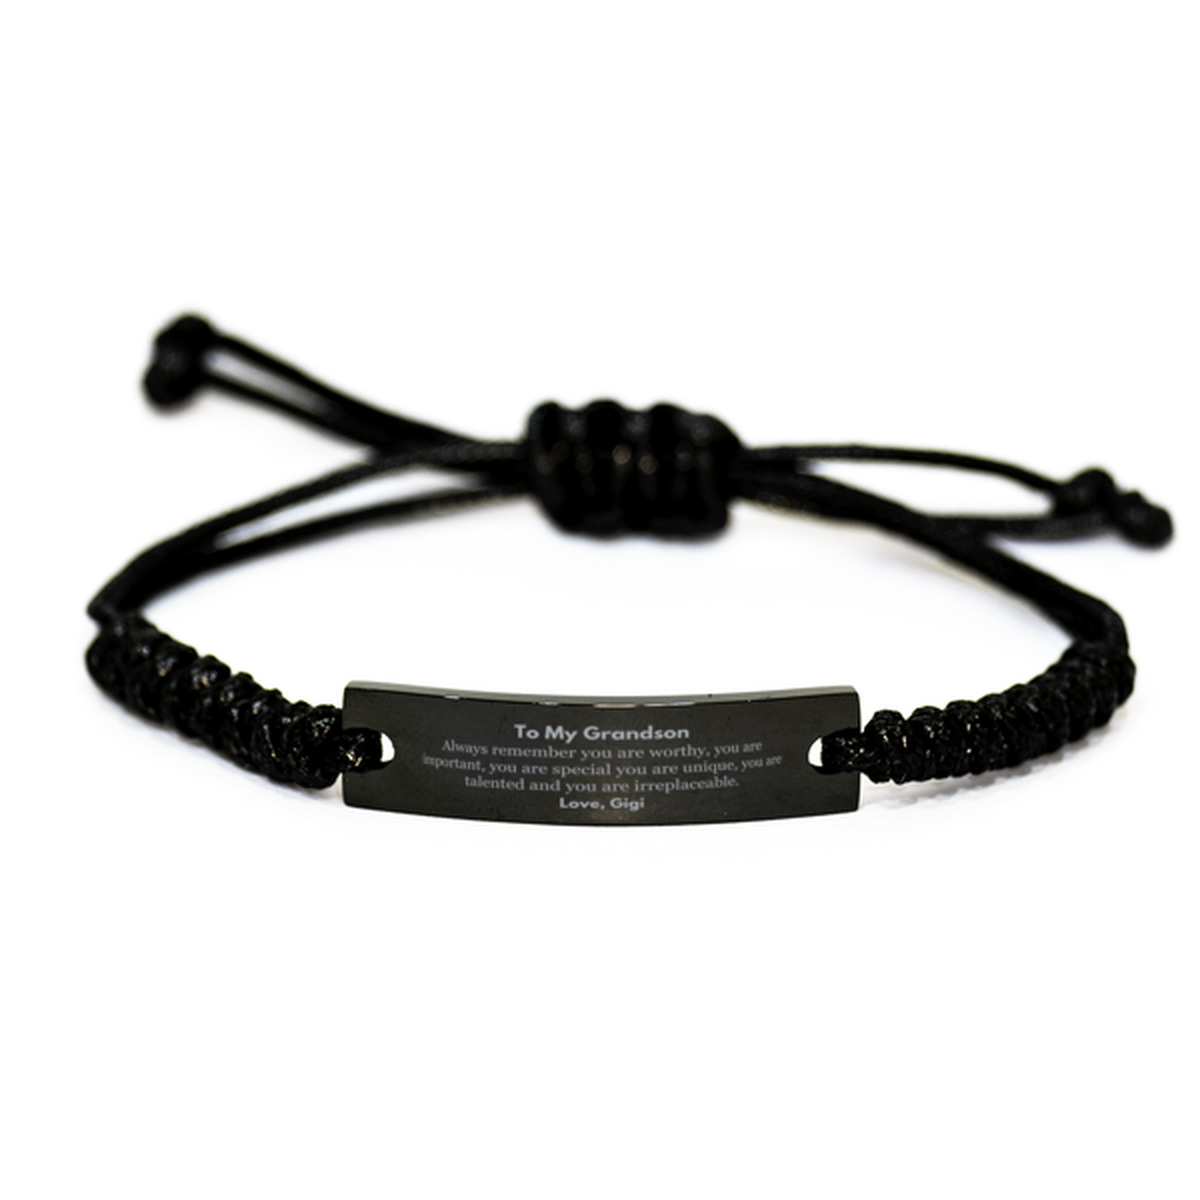 Grandson Birthday Gifts from Gigi, Inspirational Black Rope Bracelet for Grandson Christmas Graduation Gifts for Grandson Always remember you are worthy, you are important. Love, Gigi